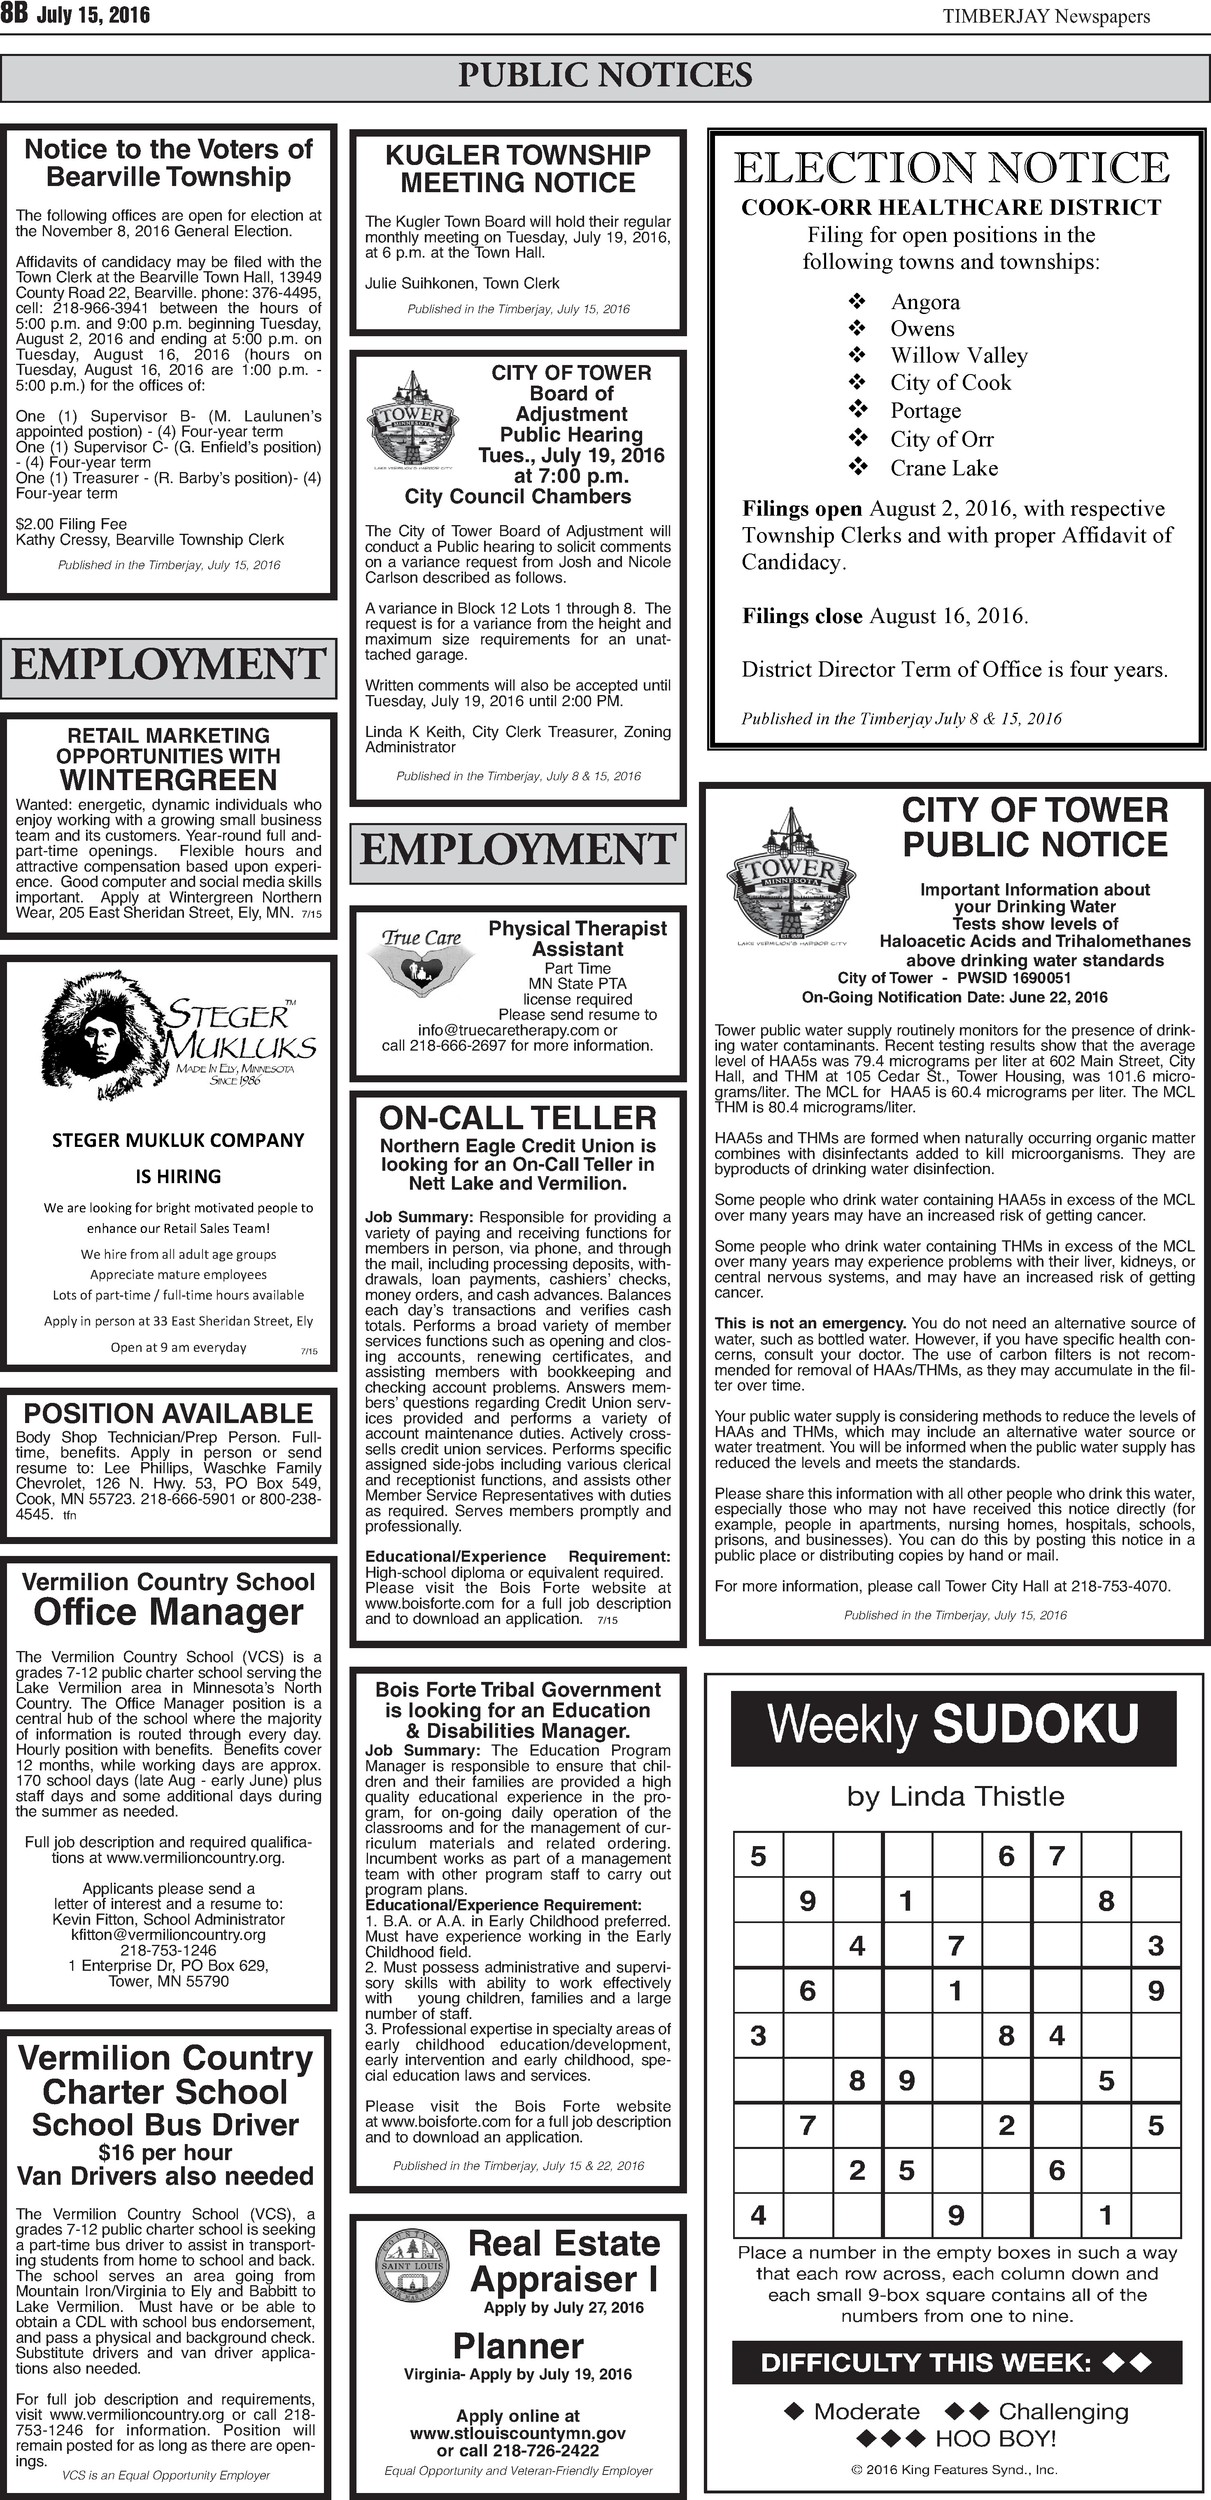 Click here to download the legal notices and classifieds from page B8